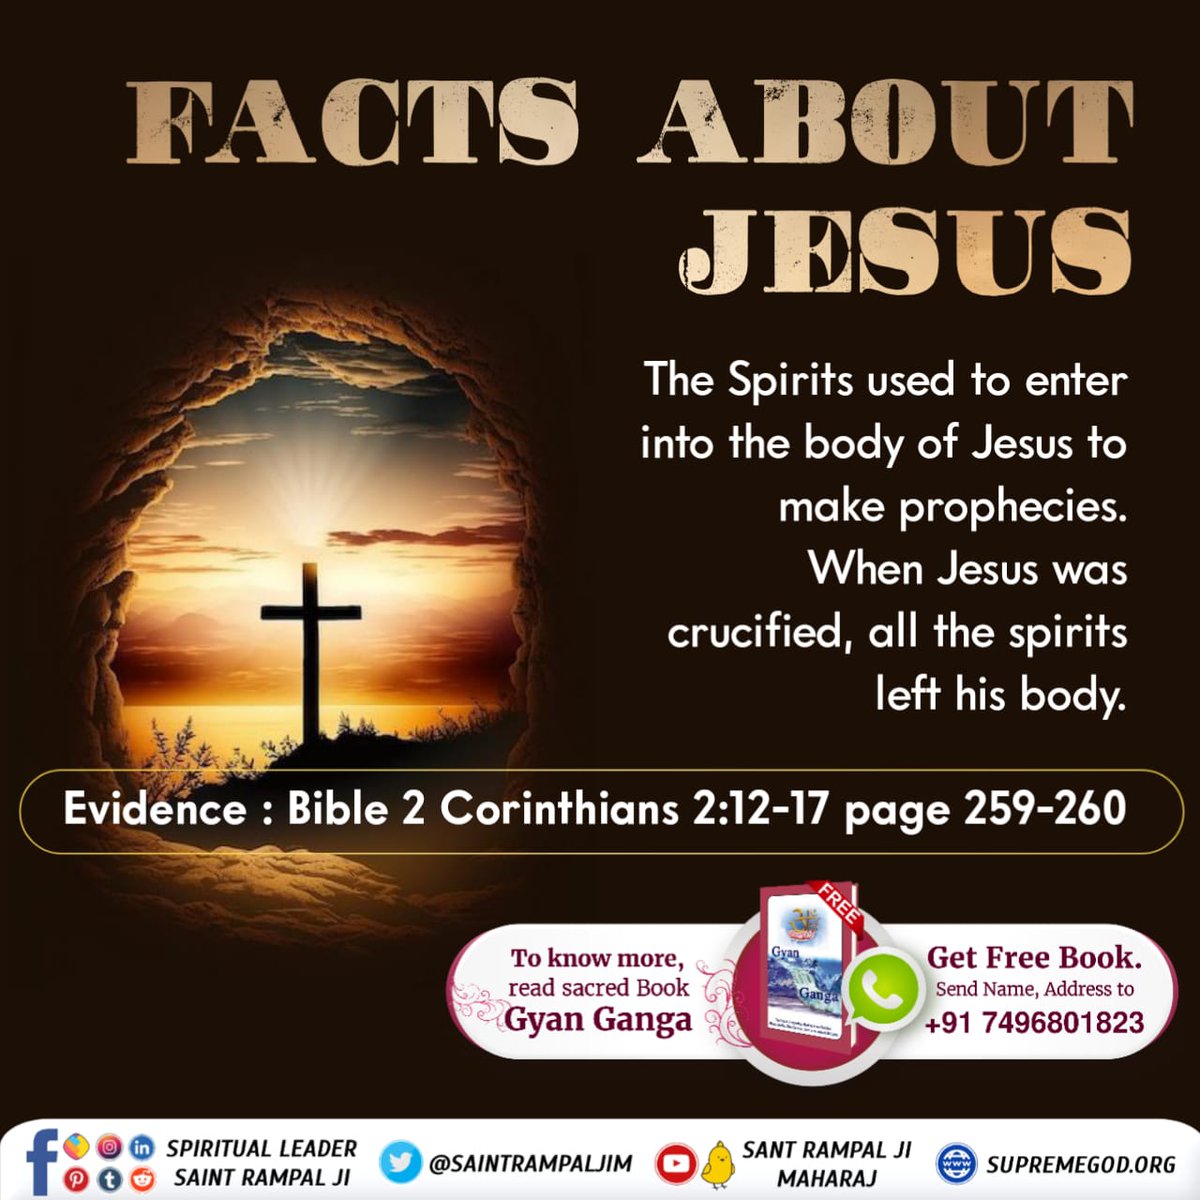 #Is_Jesus_God Jesus said he was son of God. Luke 1:32: “He will be called great and will be called the Son of the Most High.” All holy scriptures prove that Supreme God Kabir is the father of all souls. He is the creator of all. Kabir Is SupremeGod